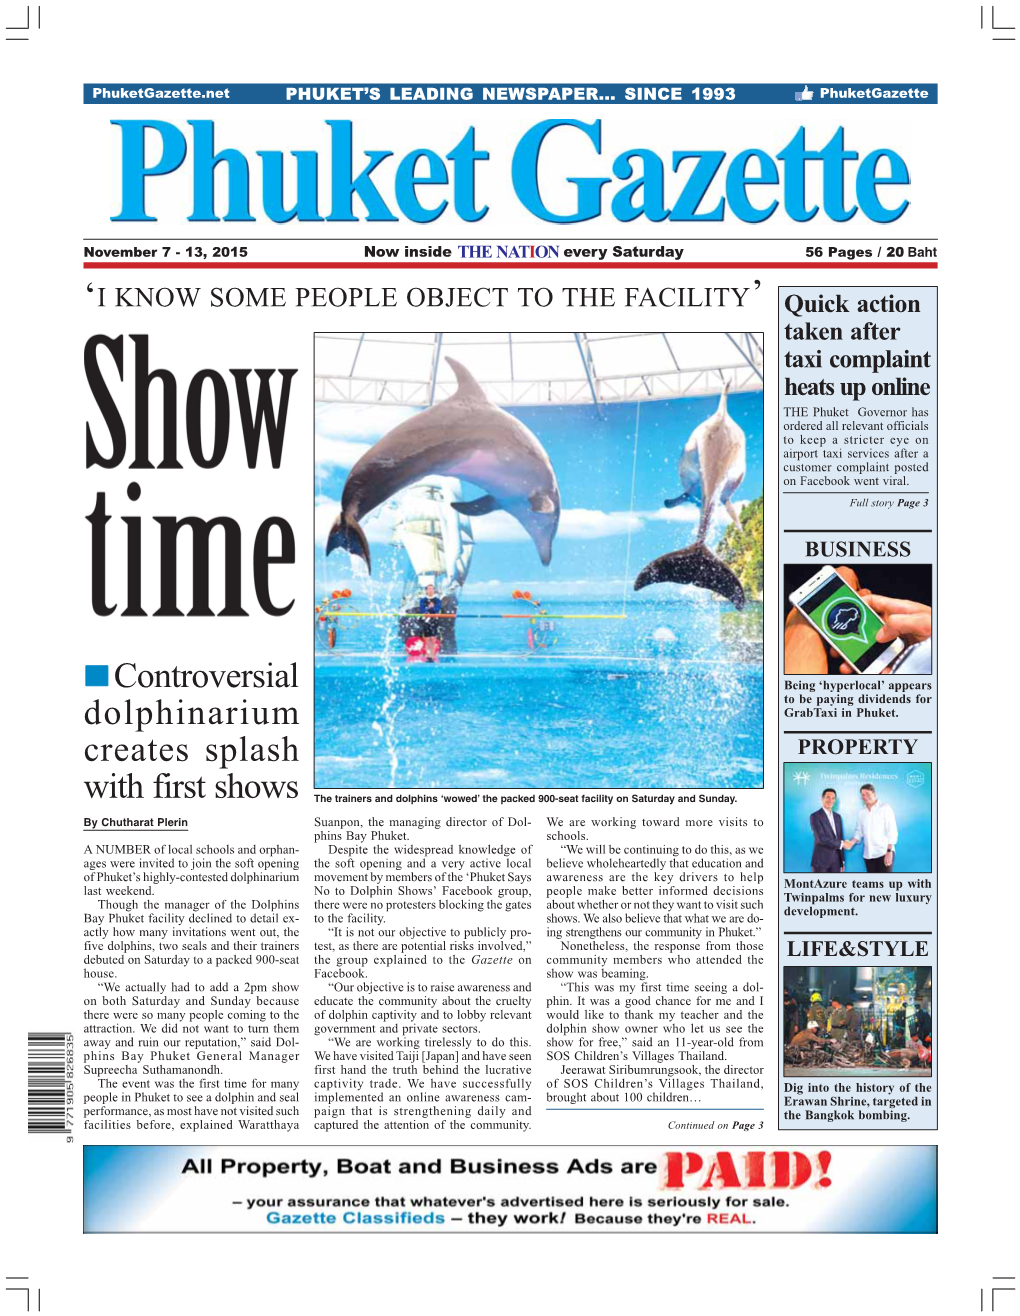 Controversial Dolphinarium Creates Splash with First Shows